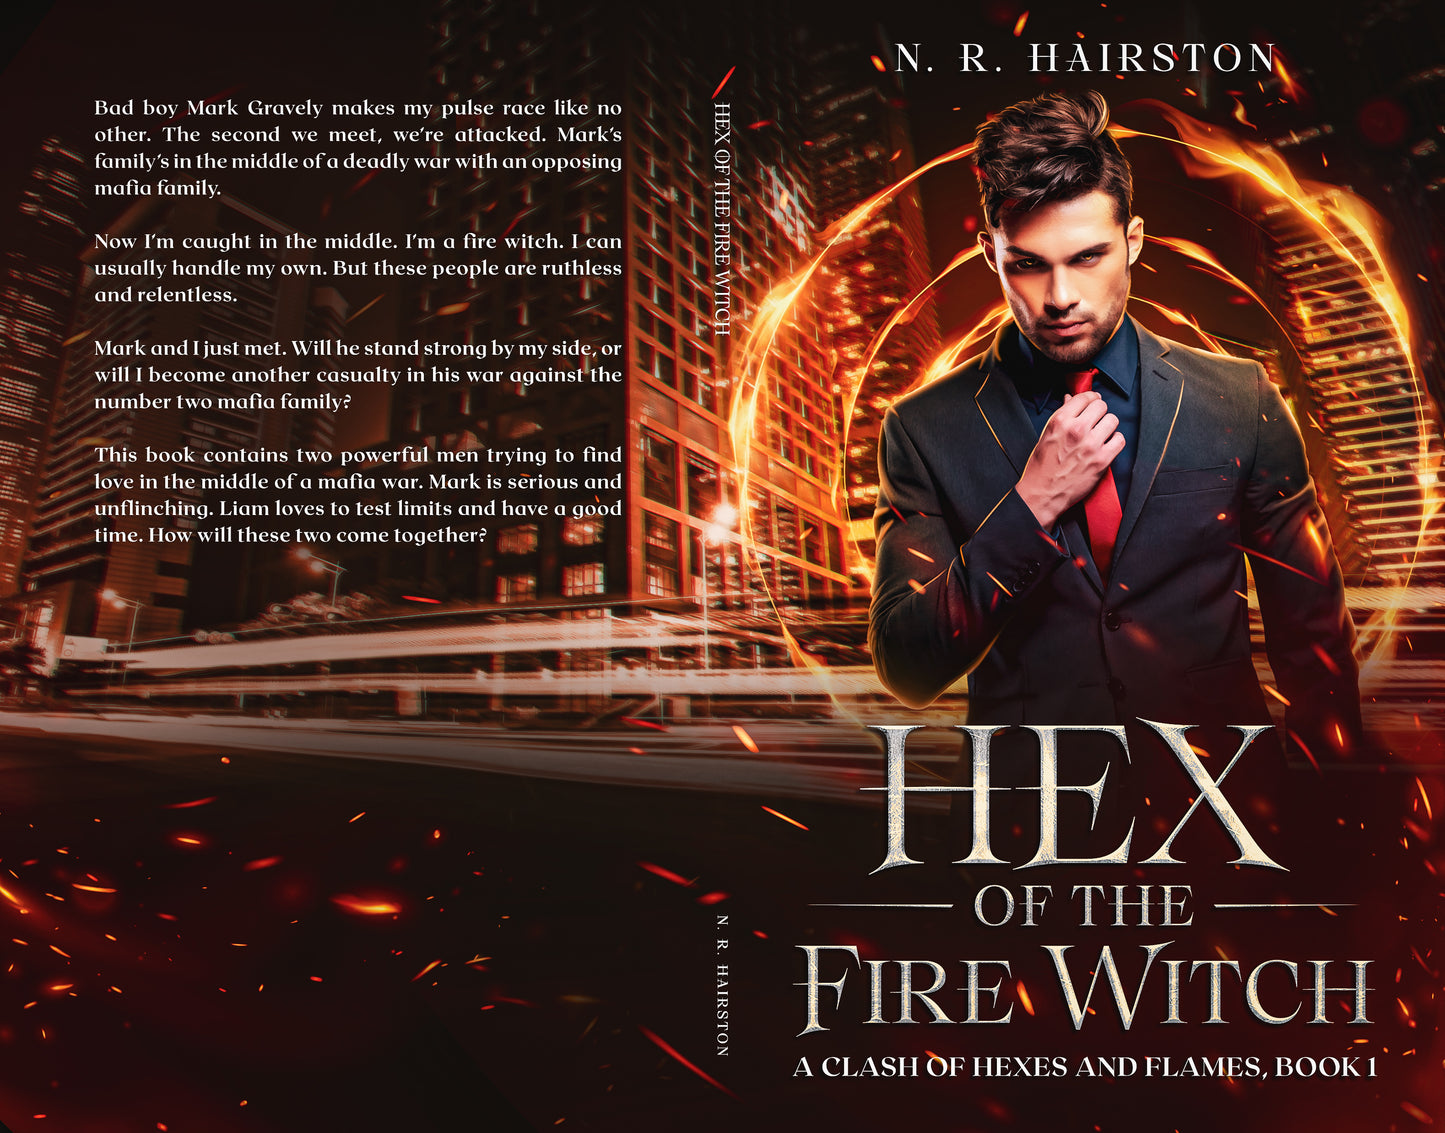 Hex of the Fire Witch: A Clash of Hexes and Flames, Book 1 Paperback